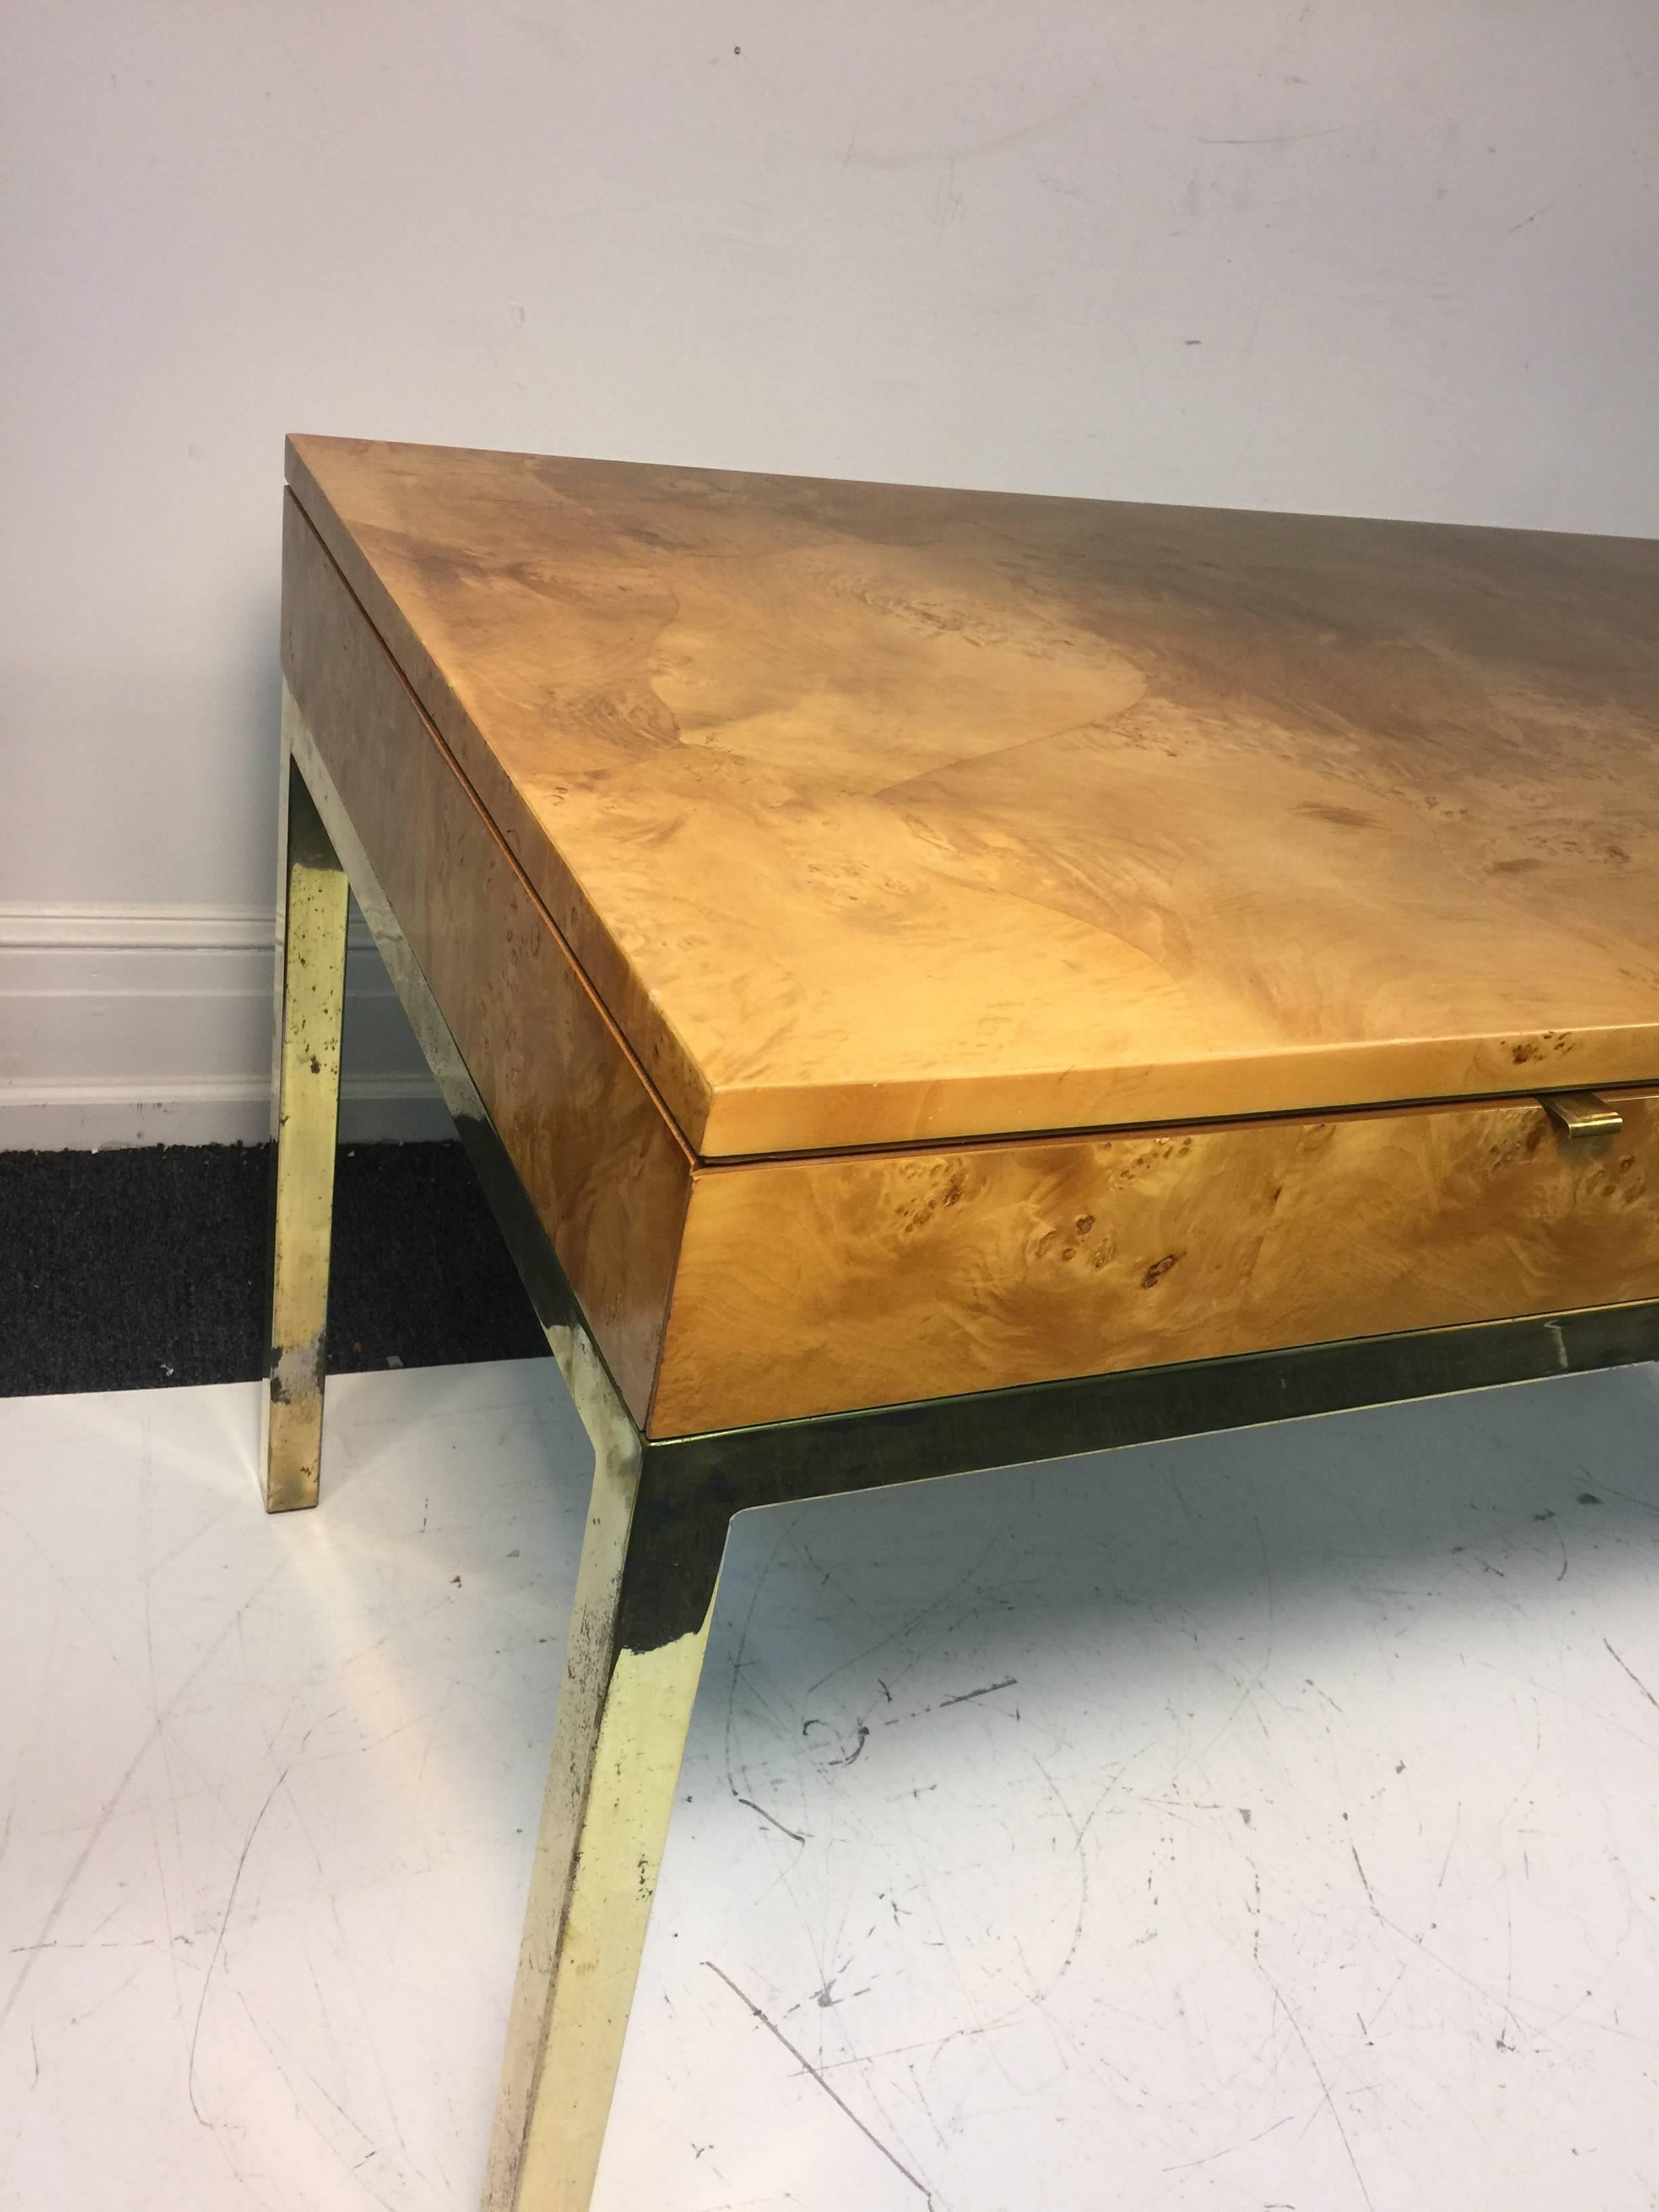 Magnificent Milo Baughman Burl Wood Desk or Console Table with Brass Base In Good Condition For Sale In Mount Penn, PA